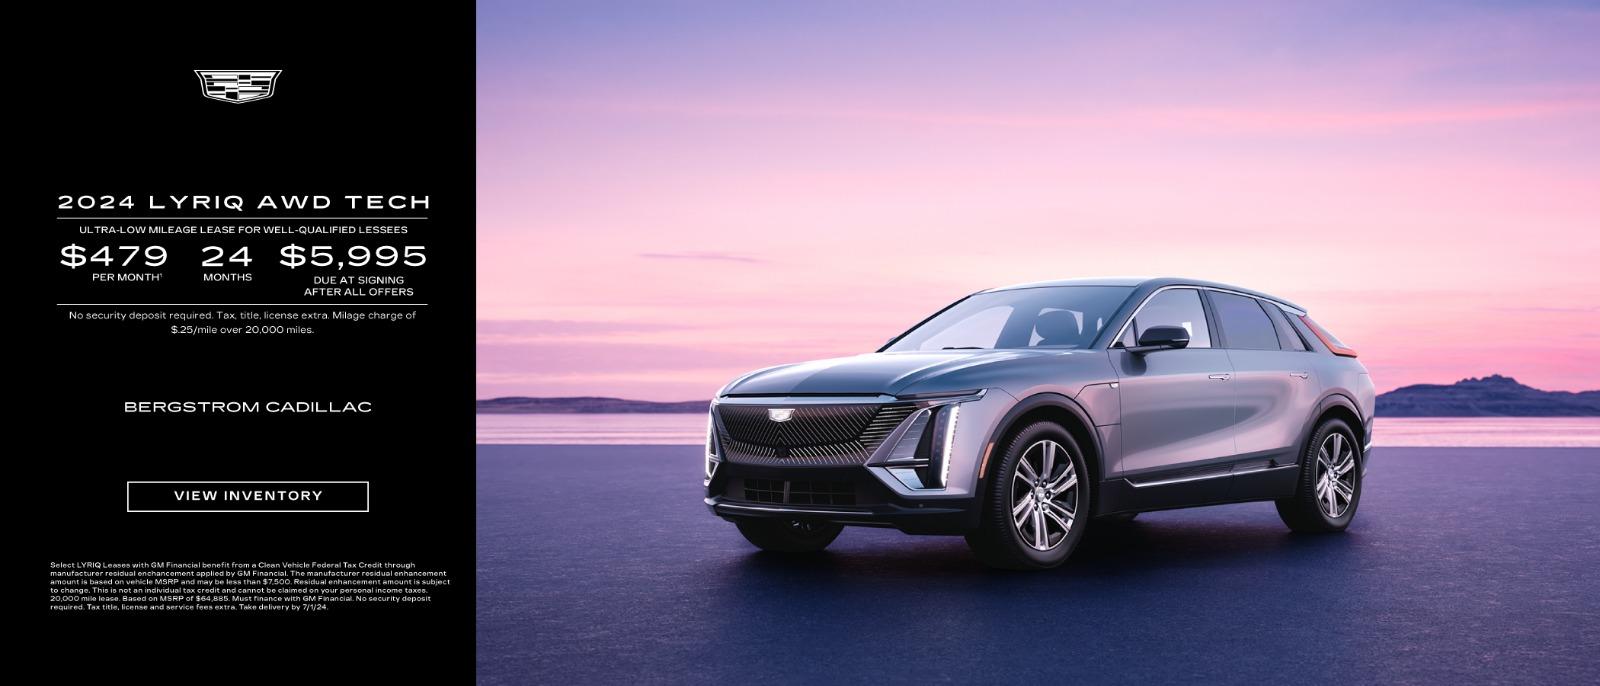 2024 Cadillac Lyriq AWD lease for $479 for 24 months